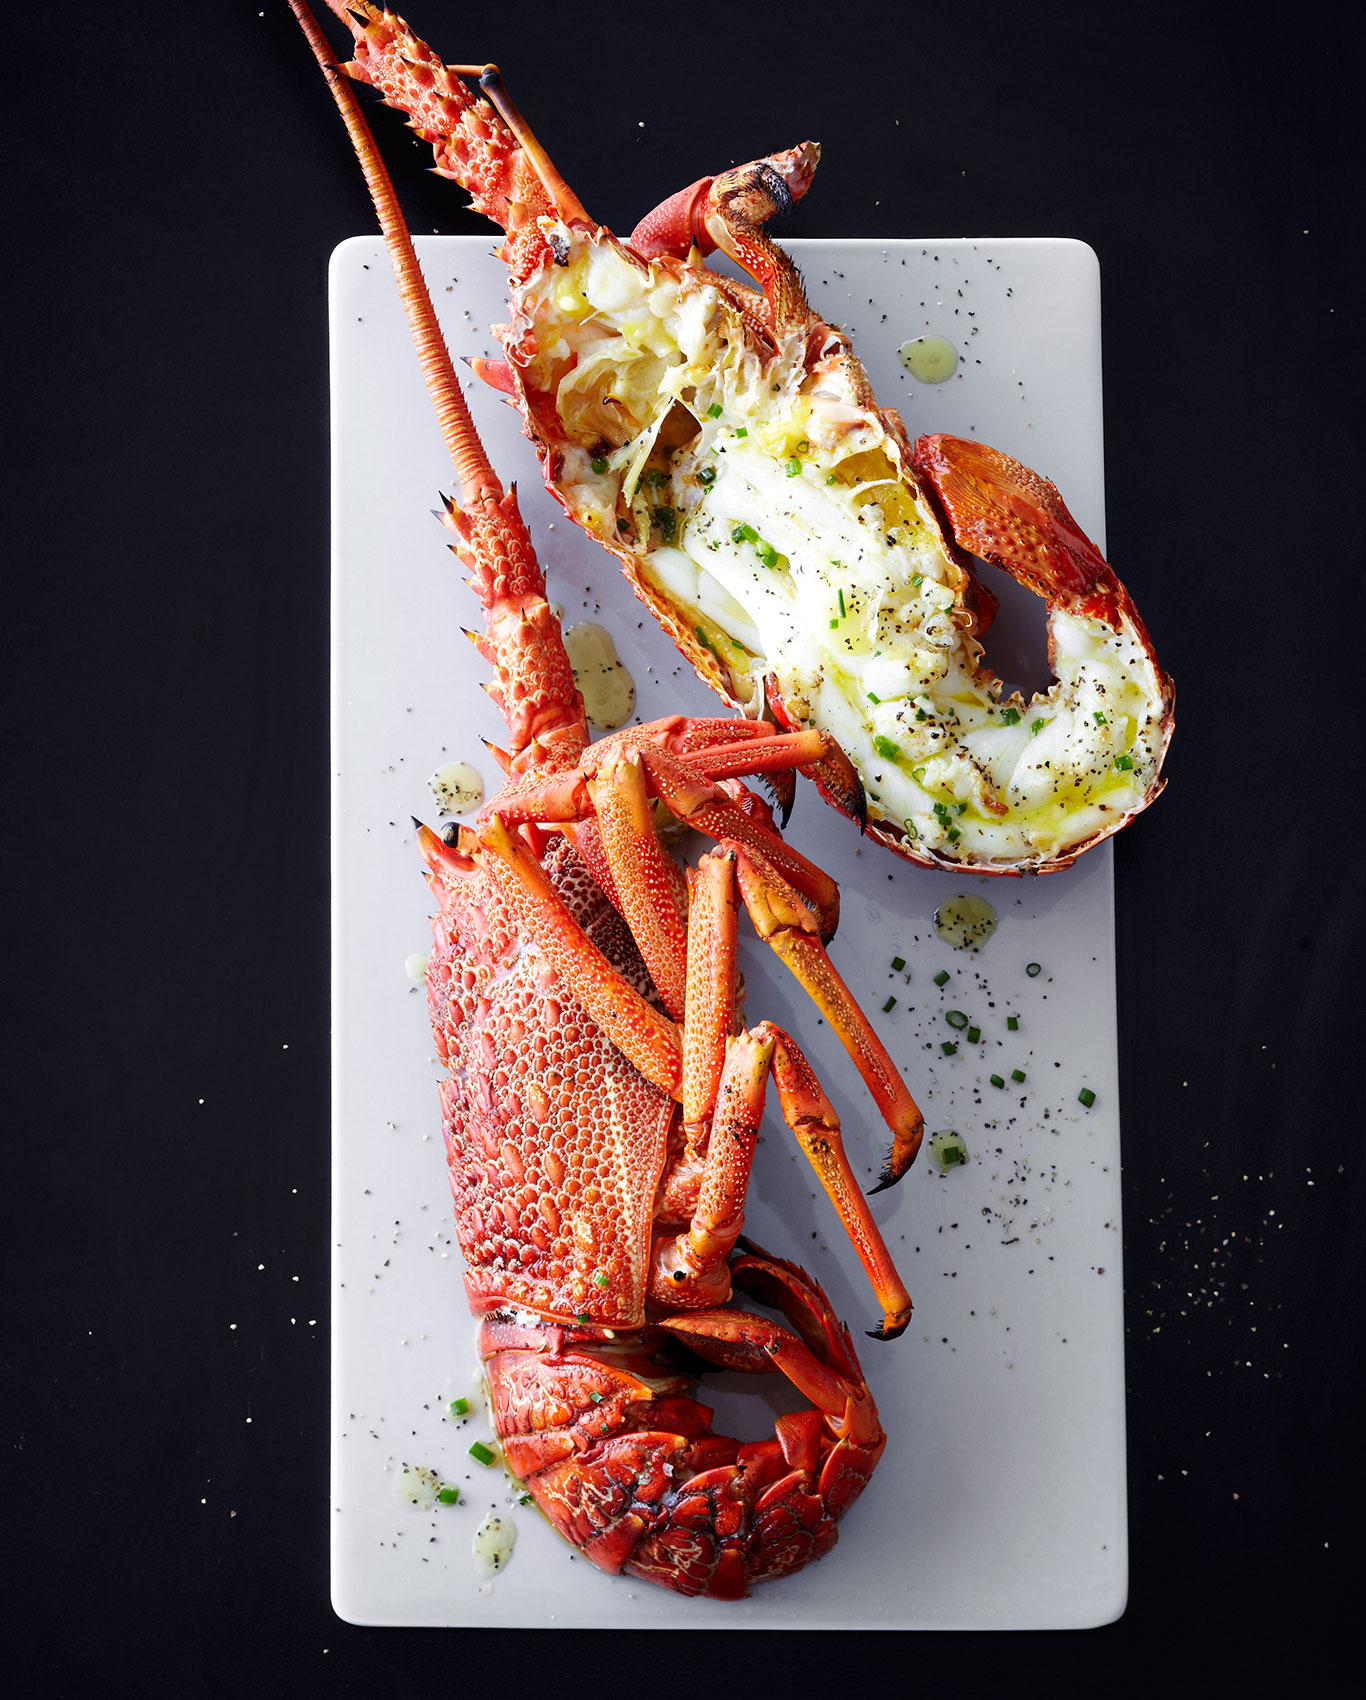 Southon Cooking • The Foodstore Grilled Crayfish with Black Pepper & Oil • Hospitality & Editorial Food Photography